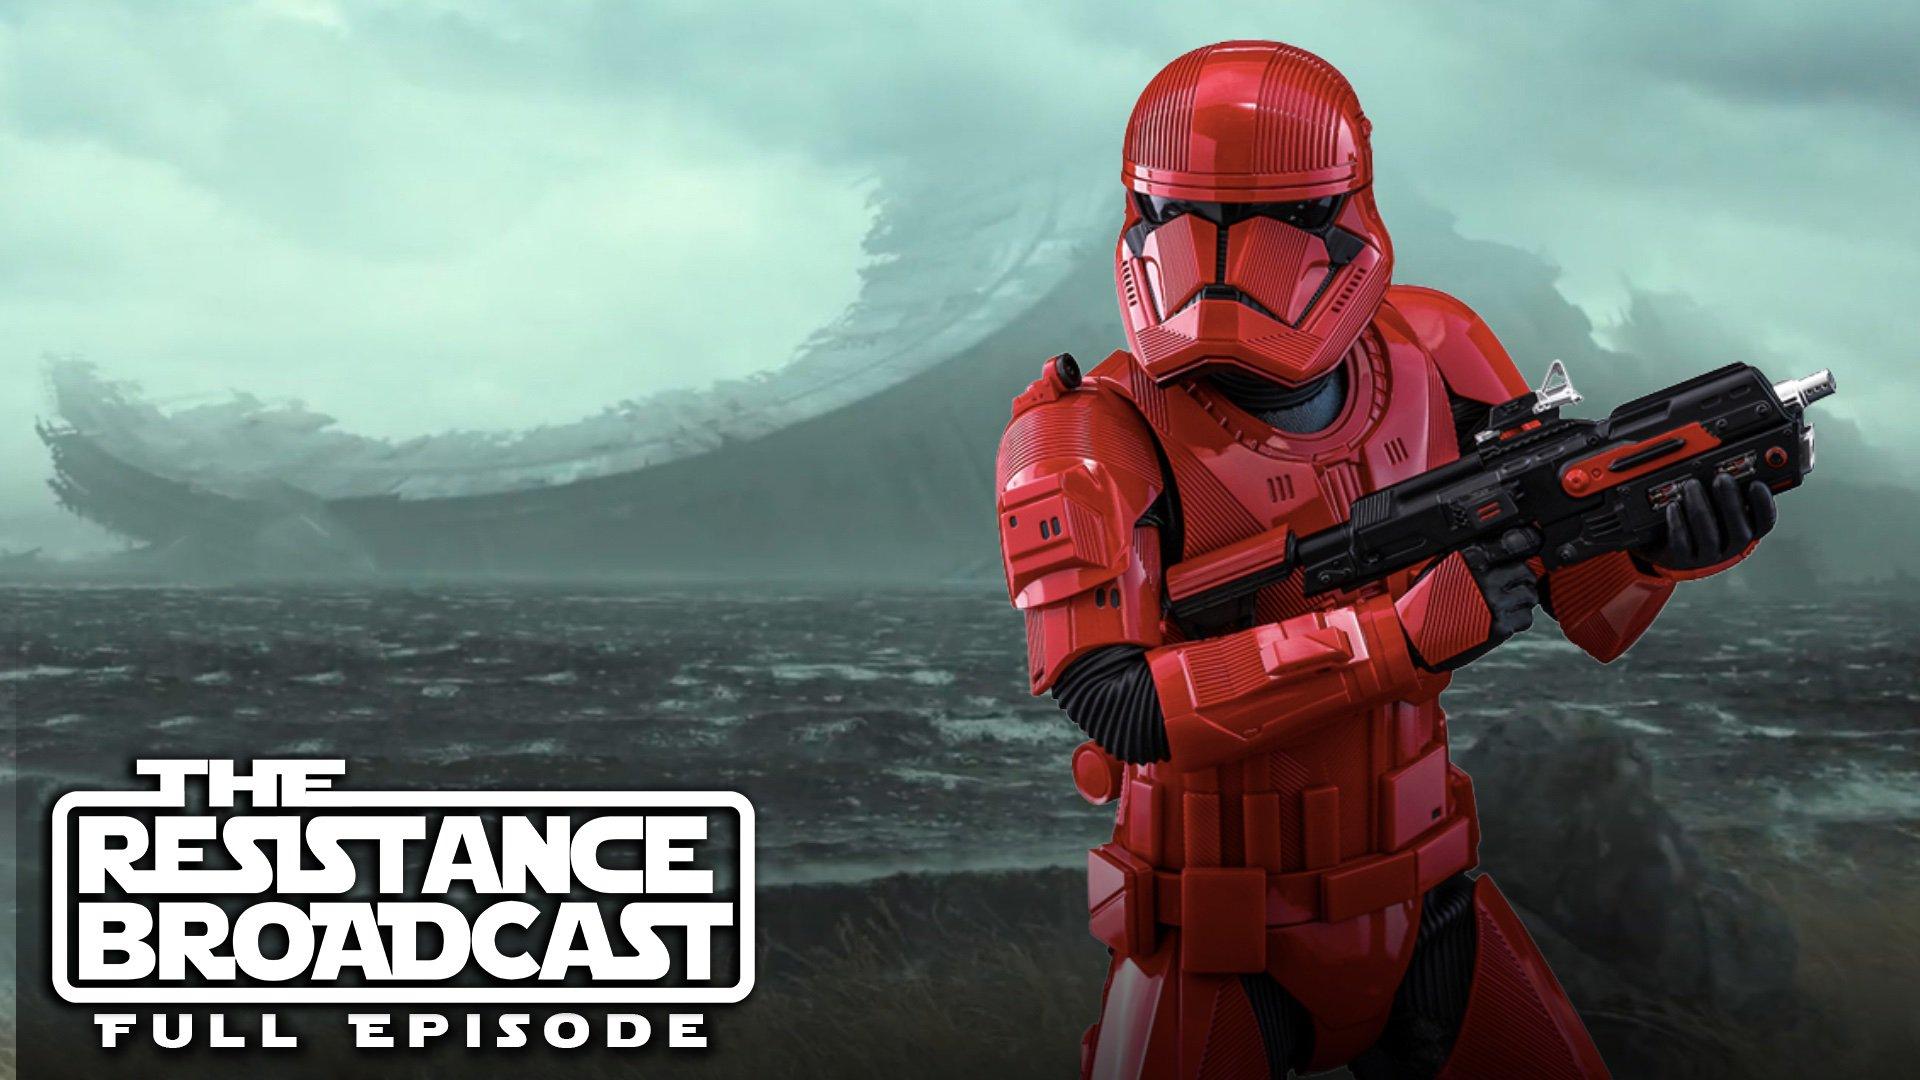 The Resistance Broadcast Sith Troopers Be More Than